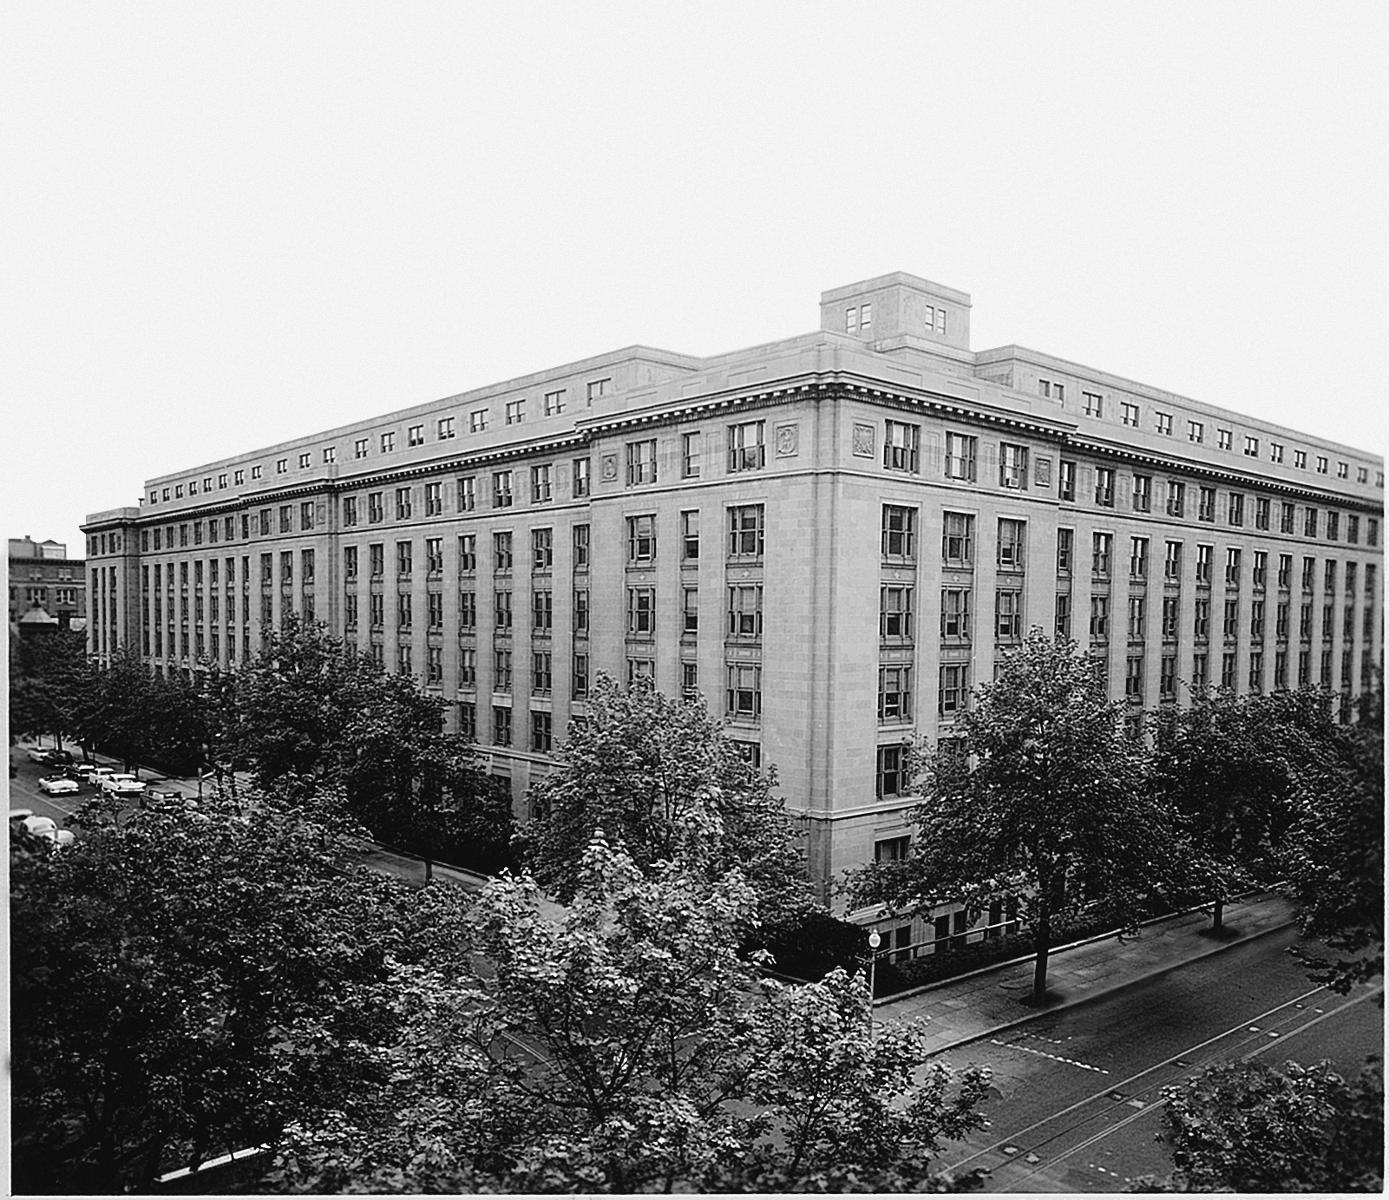 U.S. General Services Administration Building, Wa